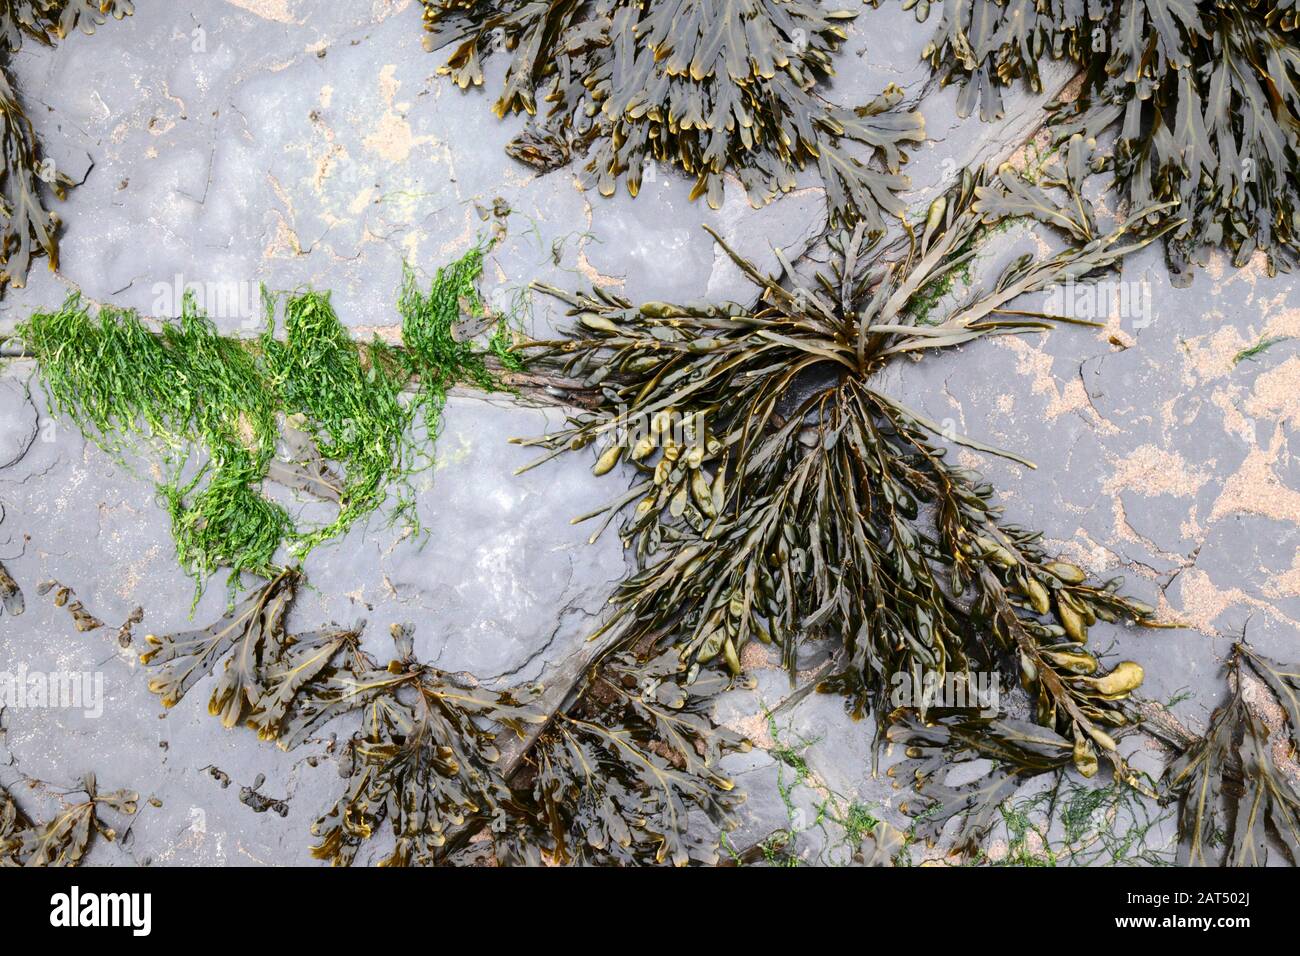 Bladder wrack seaweed (Fucus vesiculosus) growing in clints of limestone pavement on foreshore at Lavernock Point, South Glamorgan, Wales, UK Stock Photo